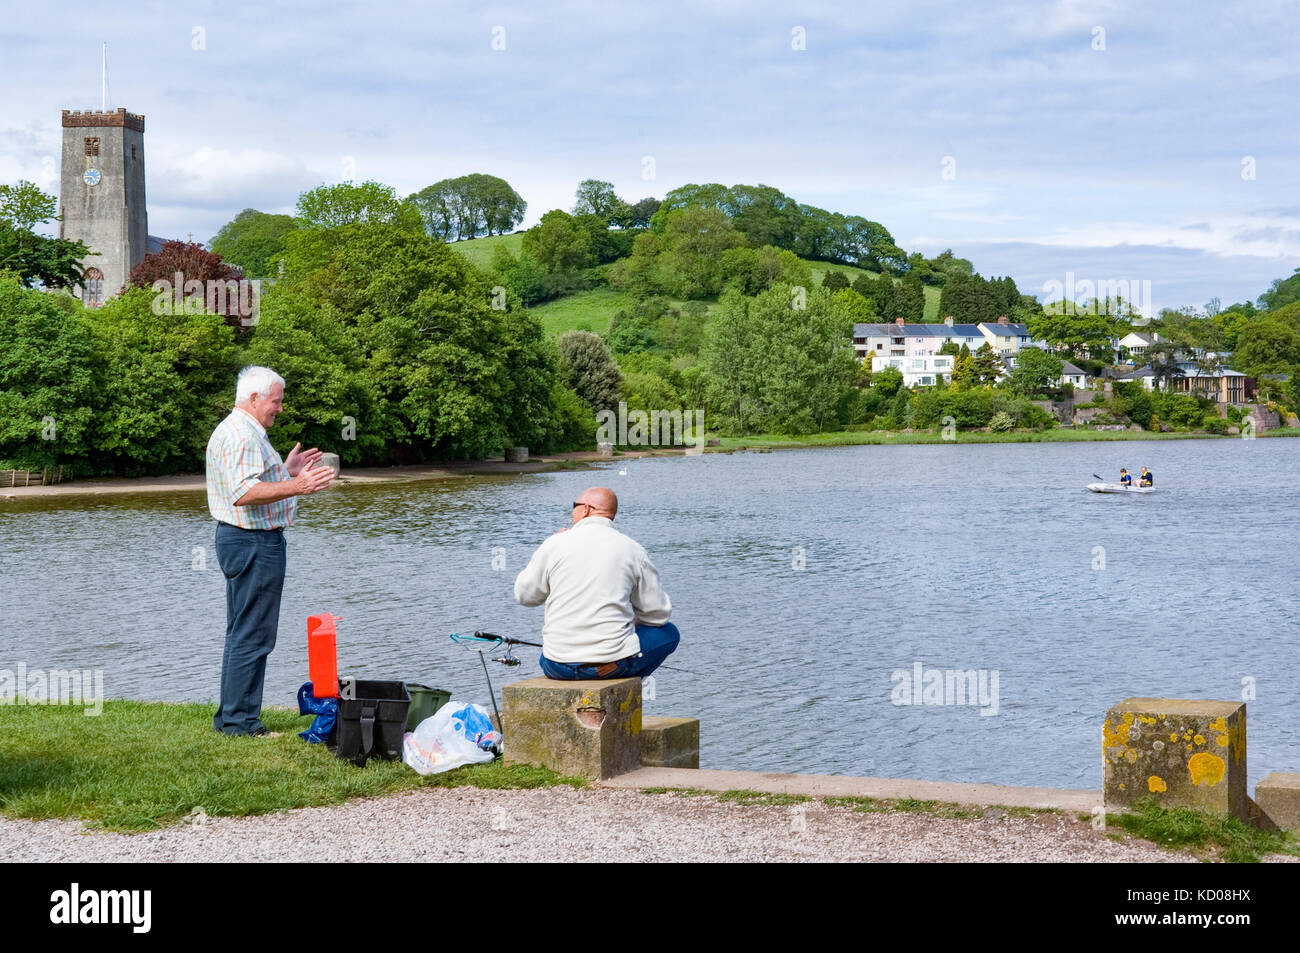 Fishing on the River Dart at Stoke Gabriel, Devon seated man and standing man talking. boat on the river with church tower and houses across the water Stock Photo